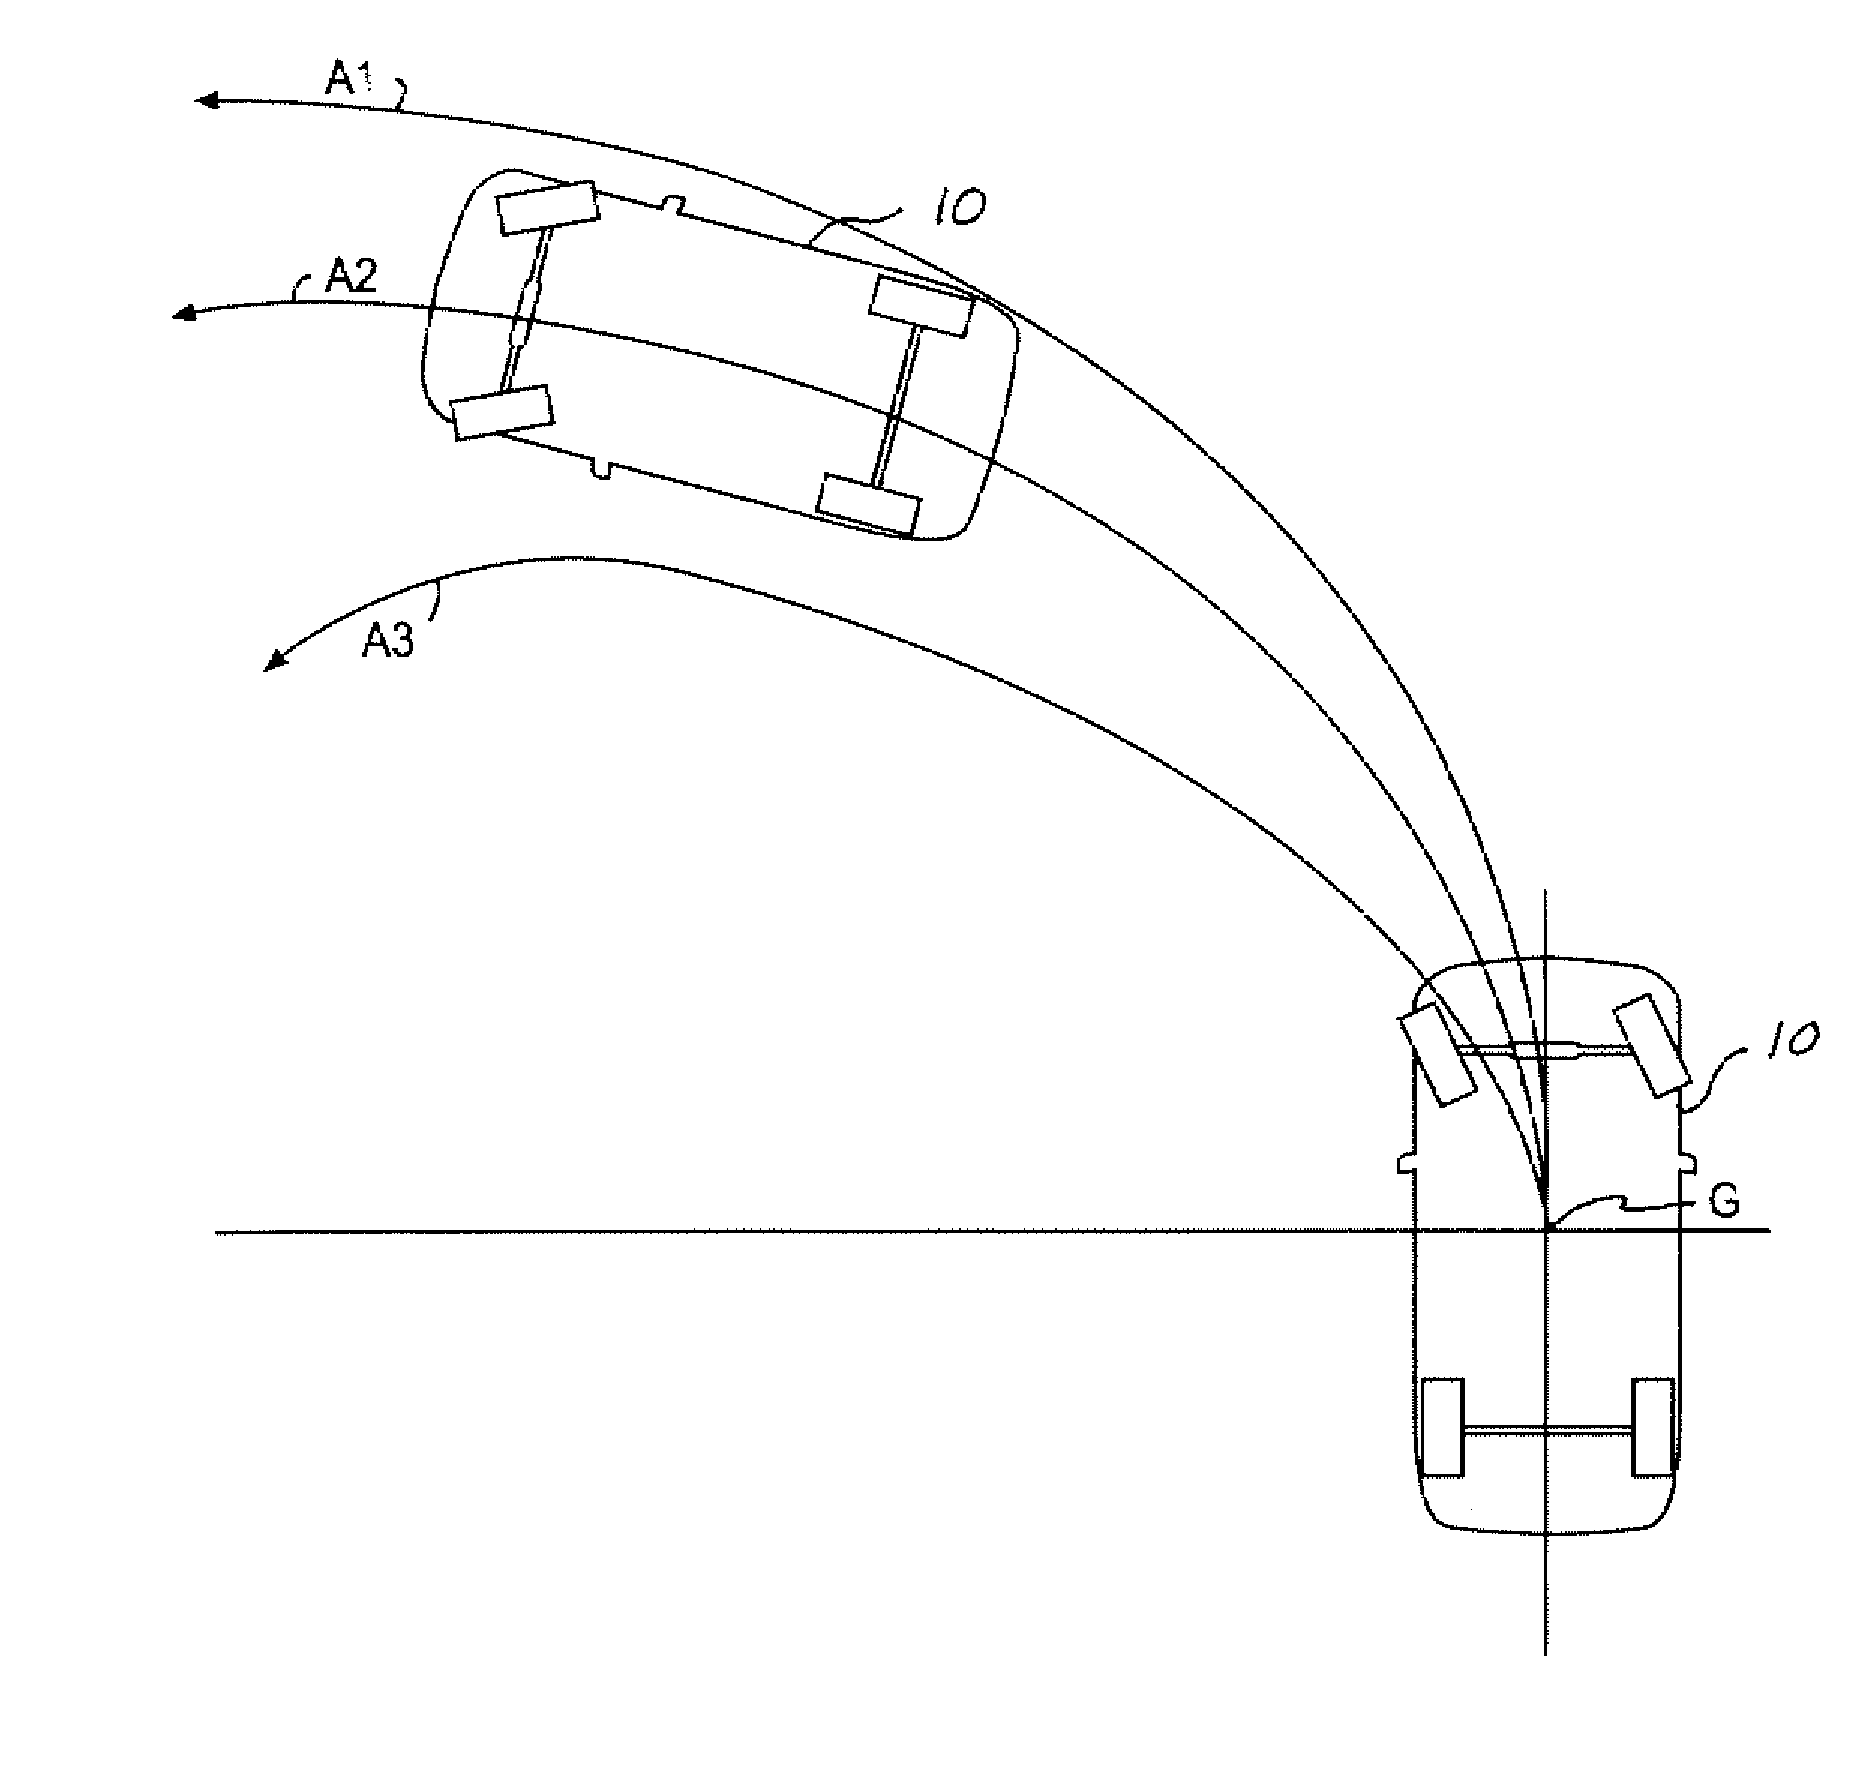 Method and apparatus for maintaining a trailer in a straight position relative to the vehicle